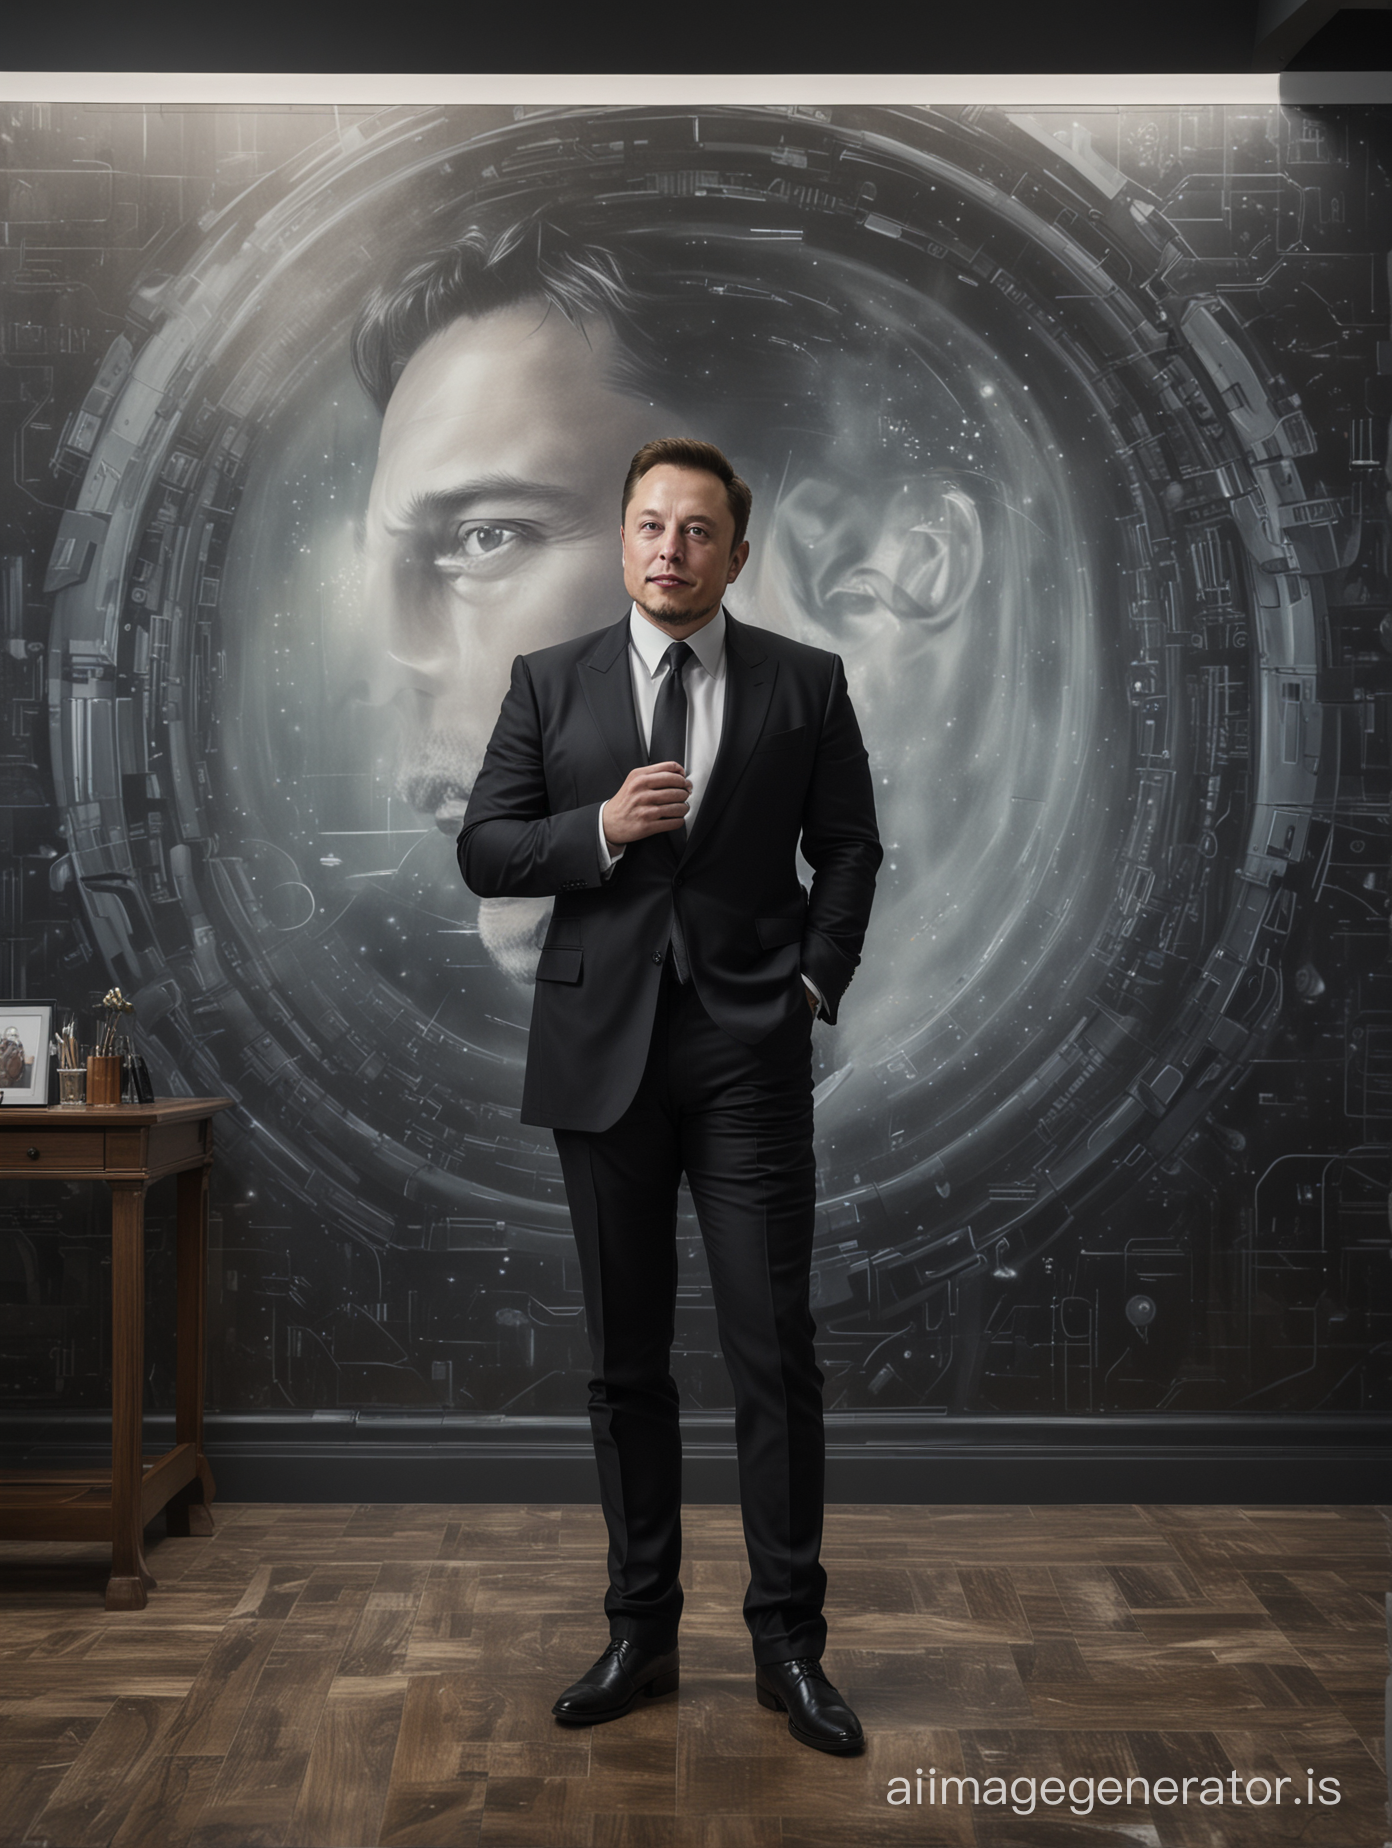 A highly realistic mural capturing Elon Musk in an elegant, dimly lit study, in mid-conversation, with the ambiance of the room reflecting a sense of future possibilities, hyper realistic, ultra realistic details, full body, standing